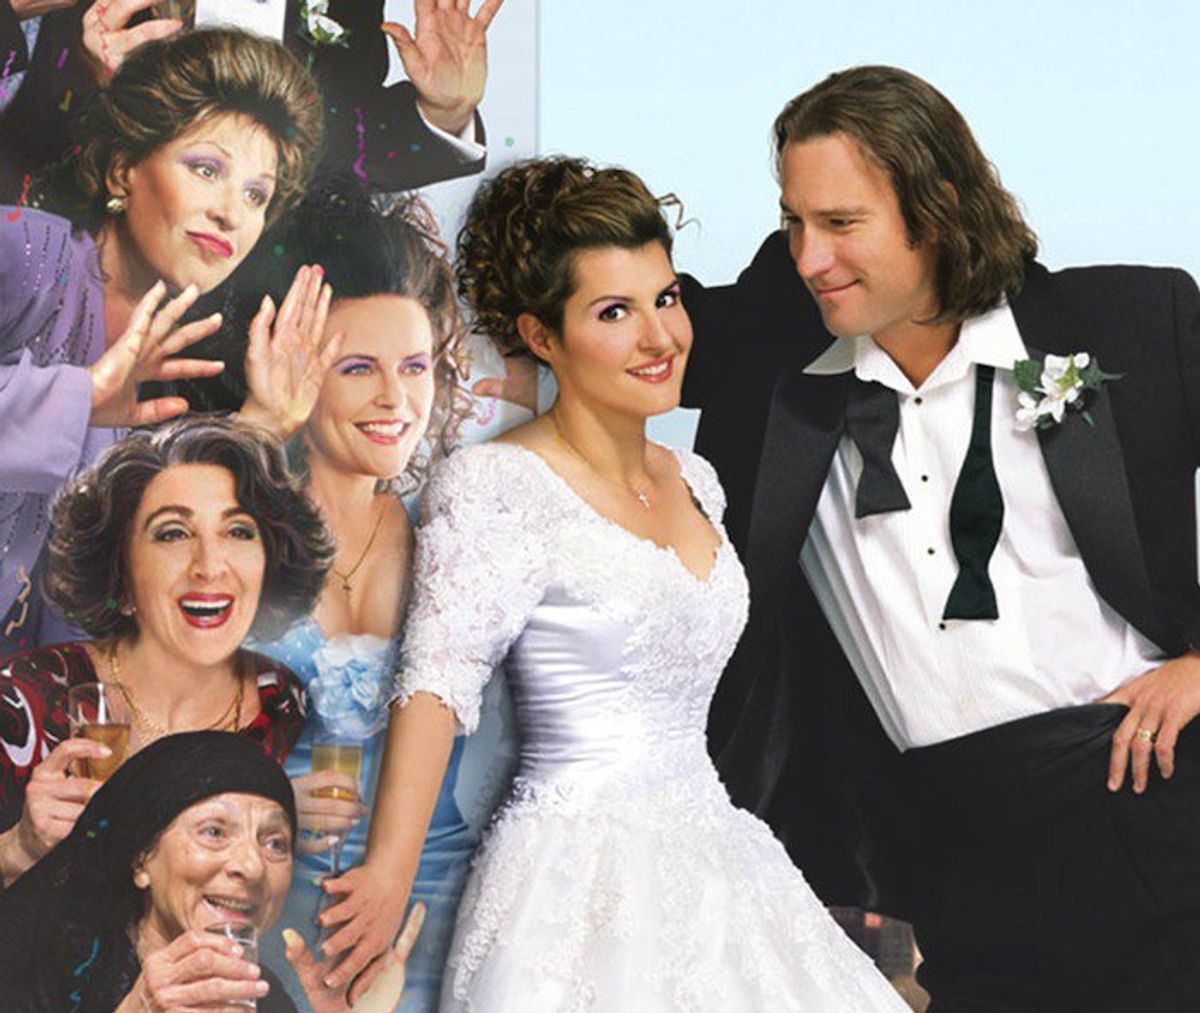 10 Reasons To Be Very Excited For "My Big Fat Greek Wedding 2"